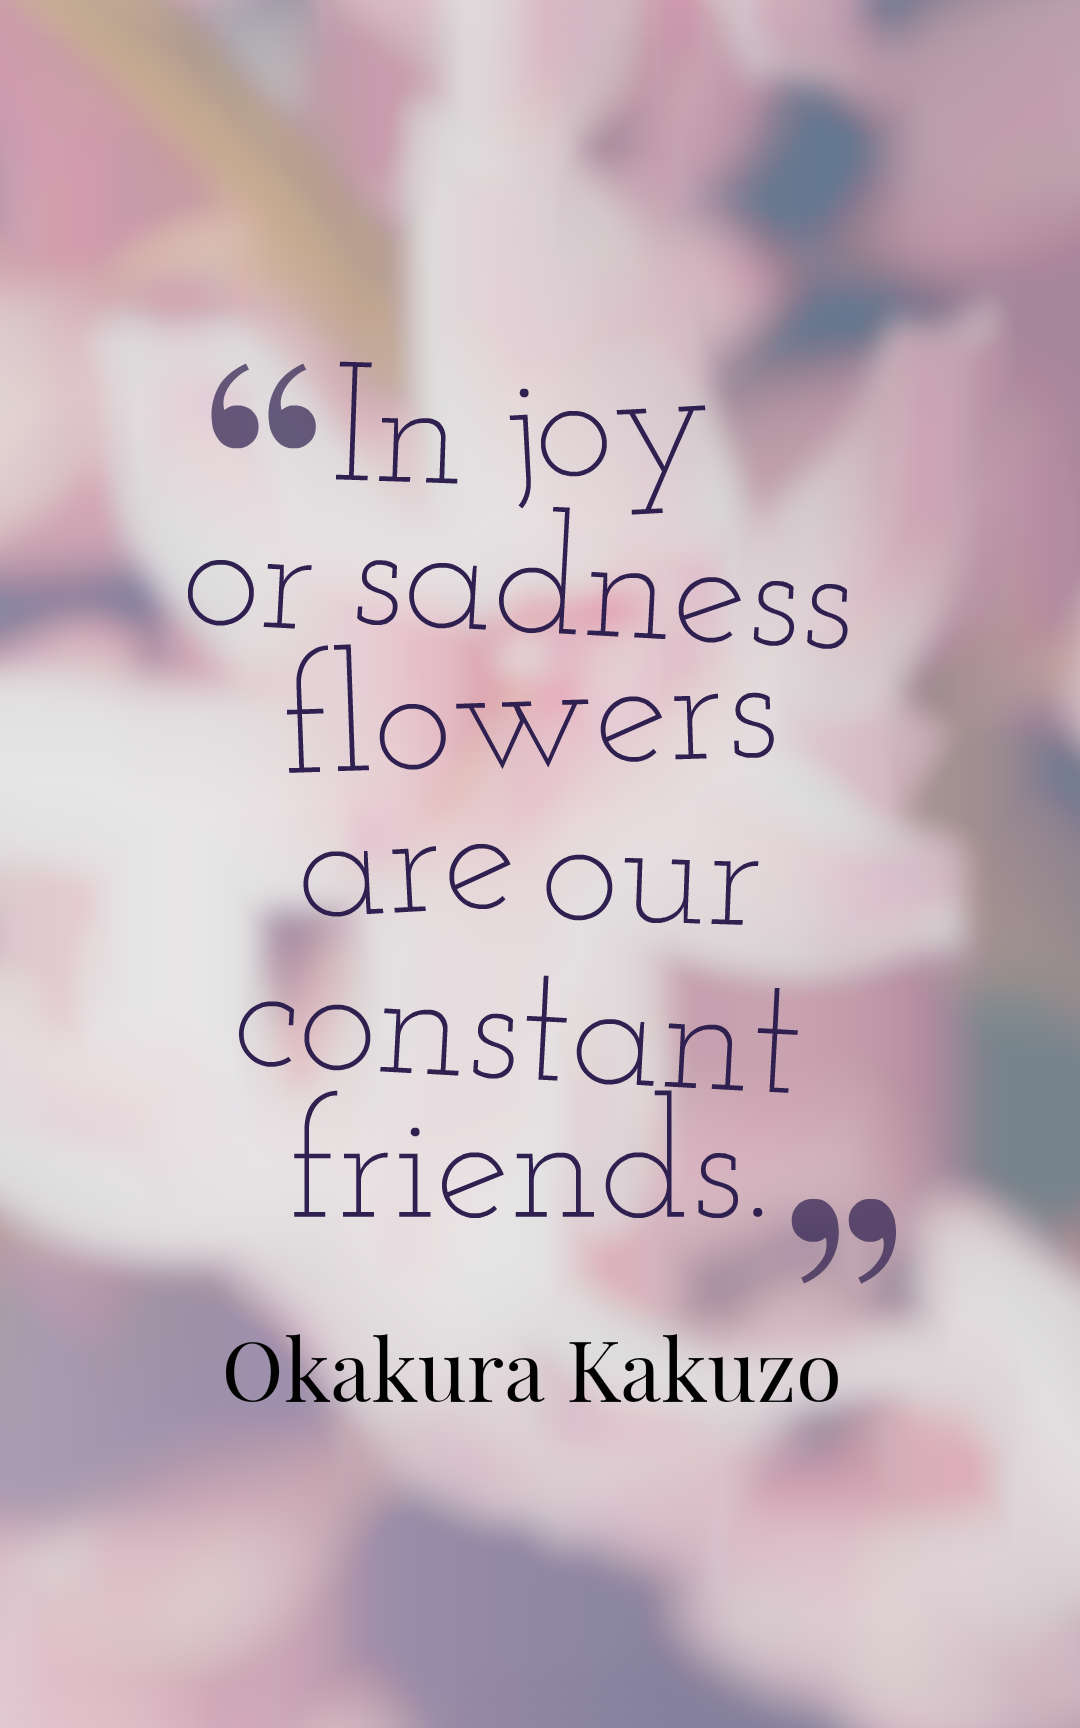 In joy or sadness flowers are our constant friends.